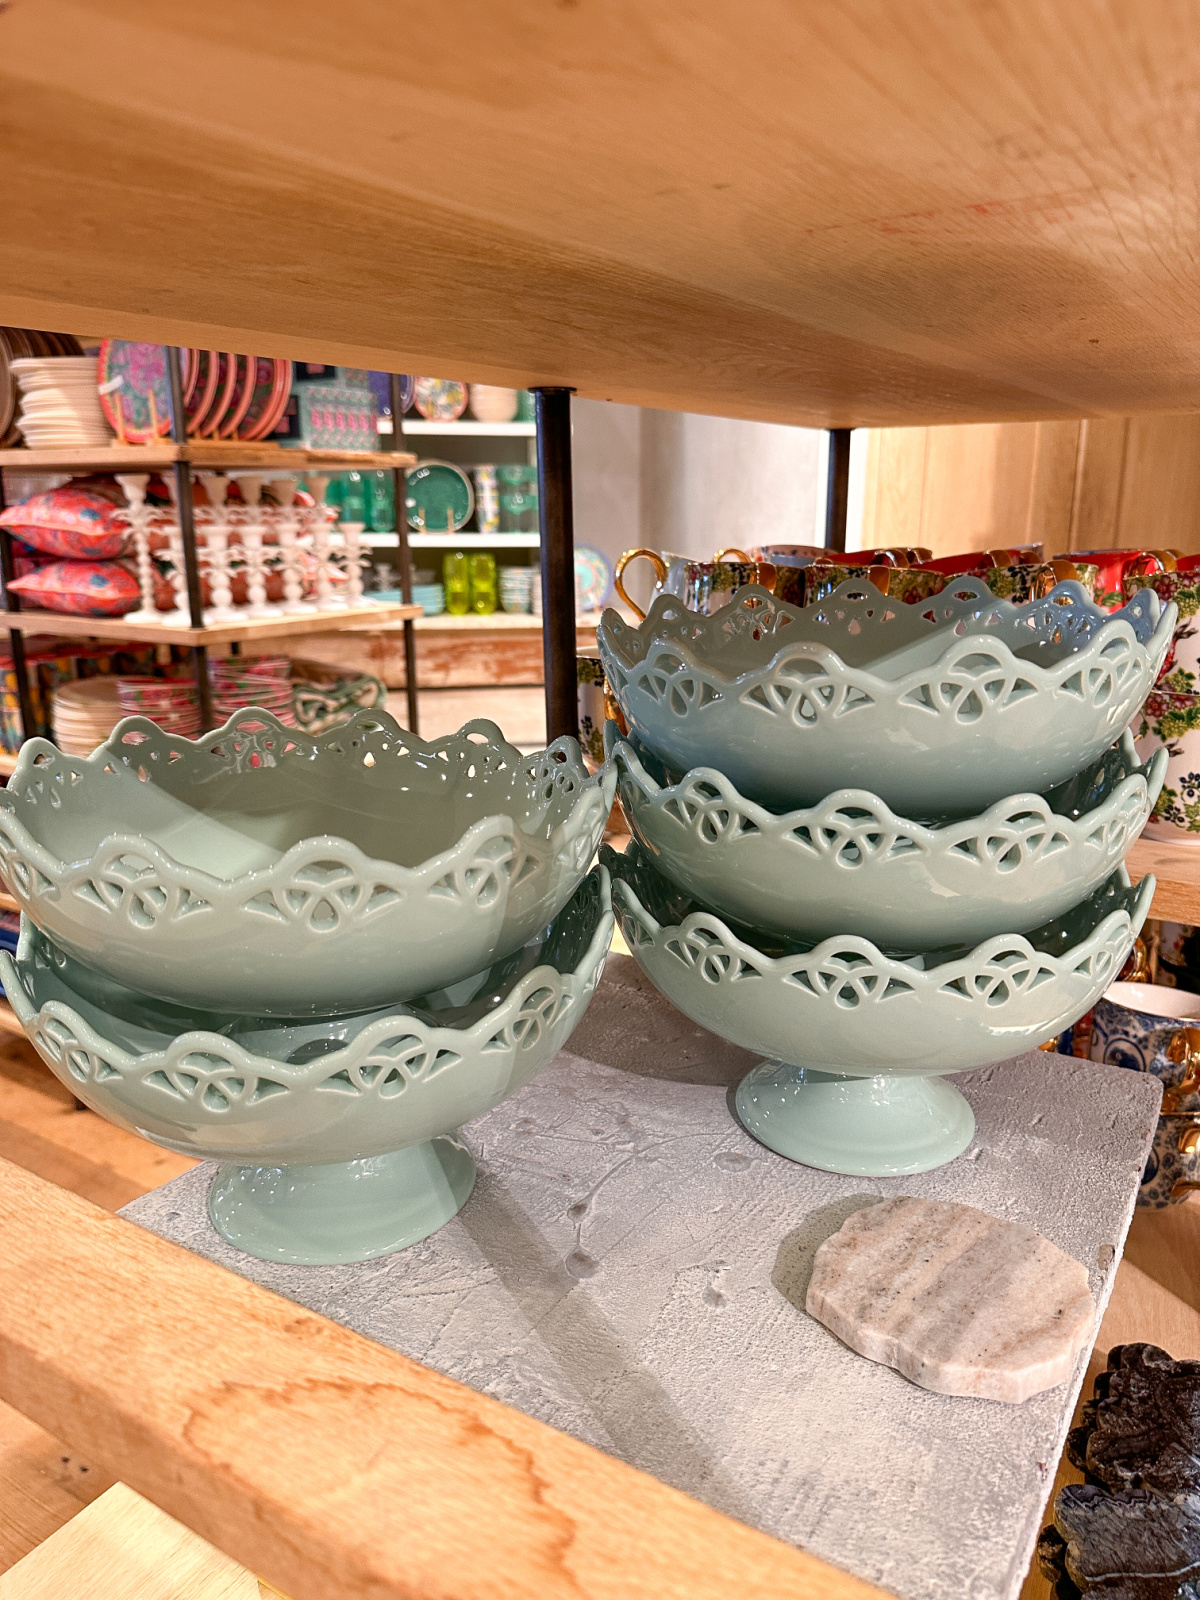 Blue compote bowls with lace like detail.